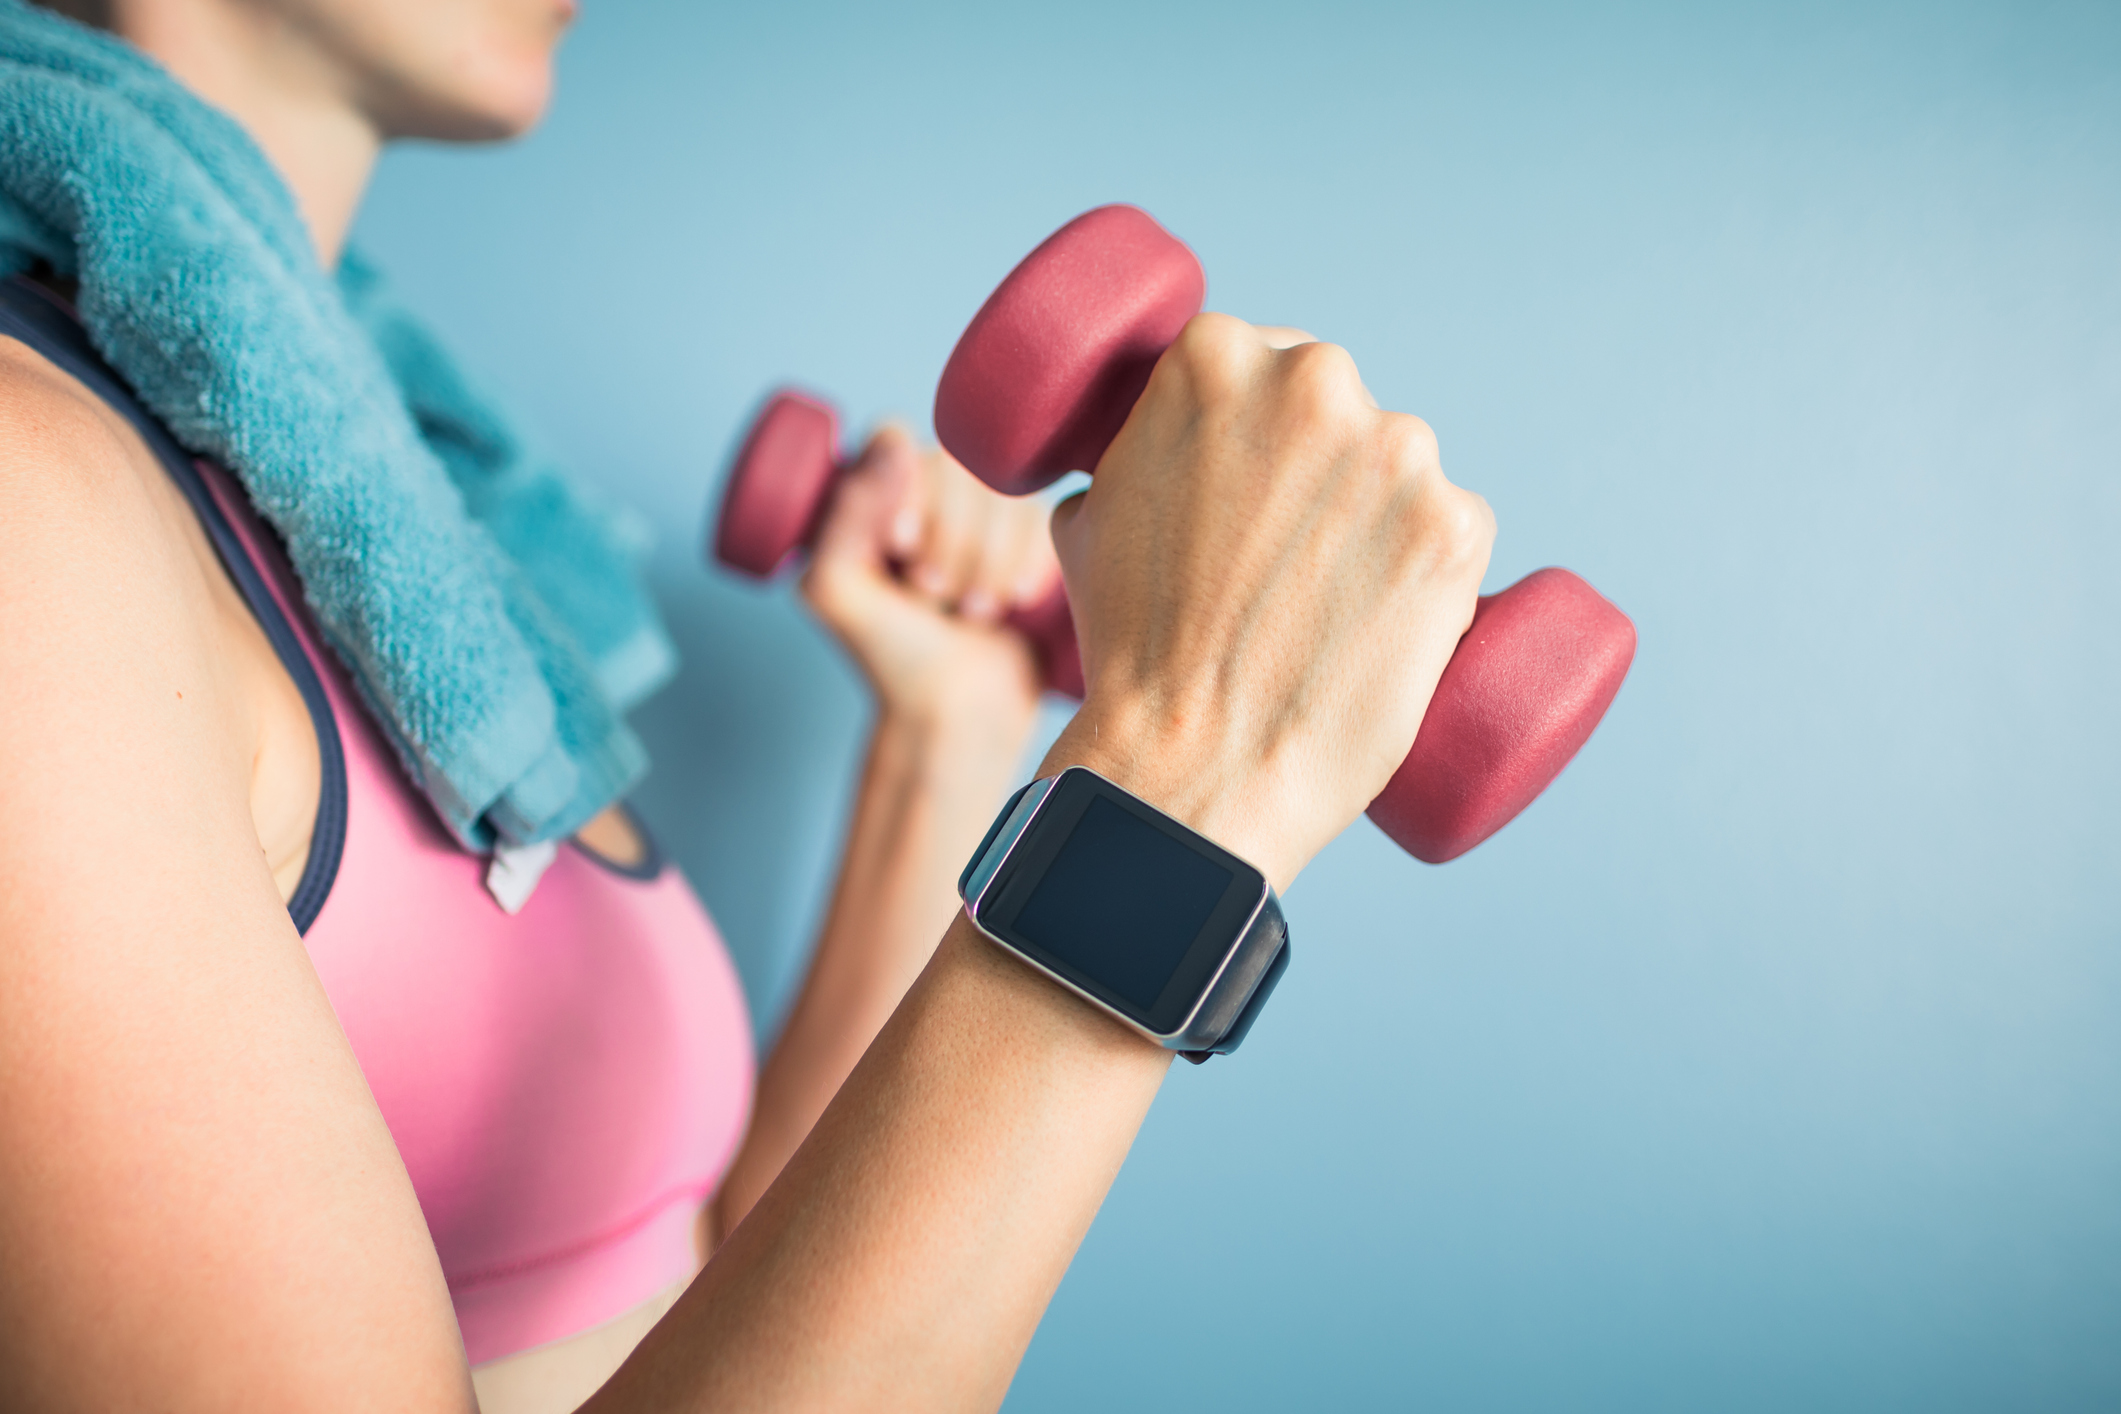 Workout revelation means less time at the gym and more muscle